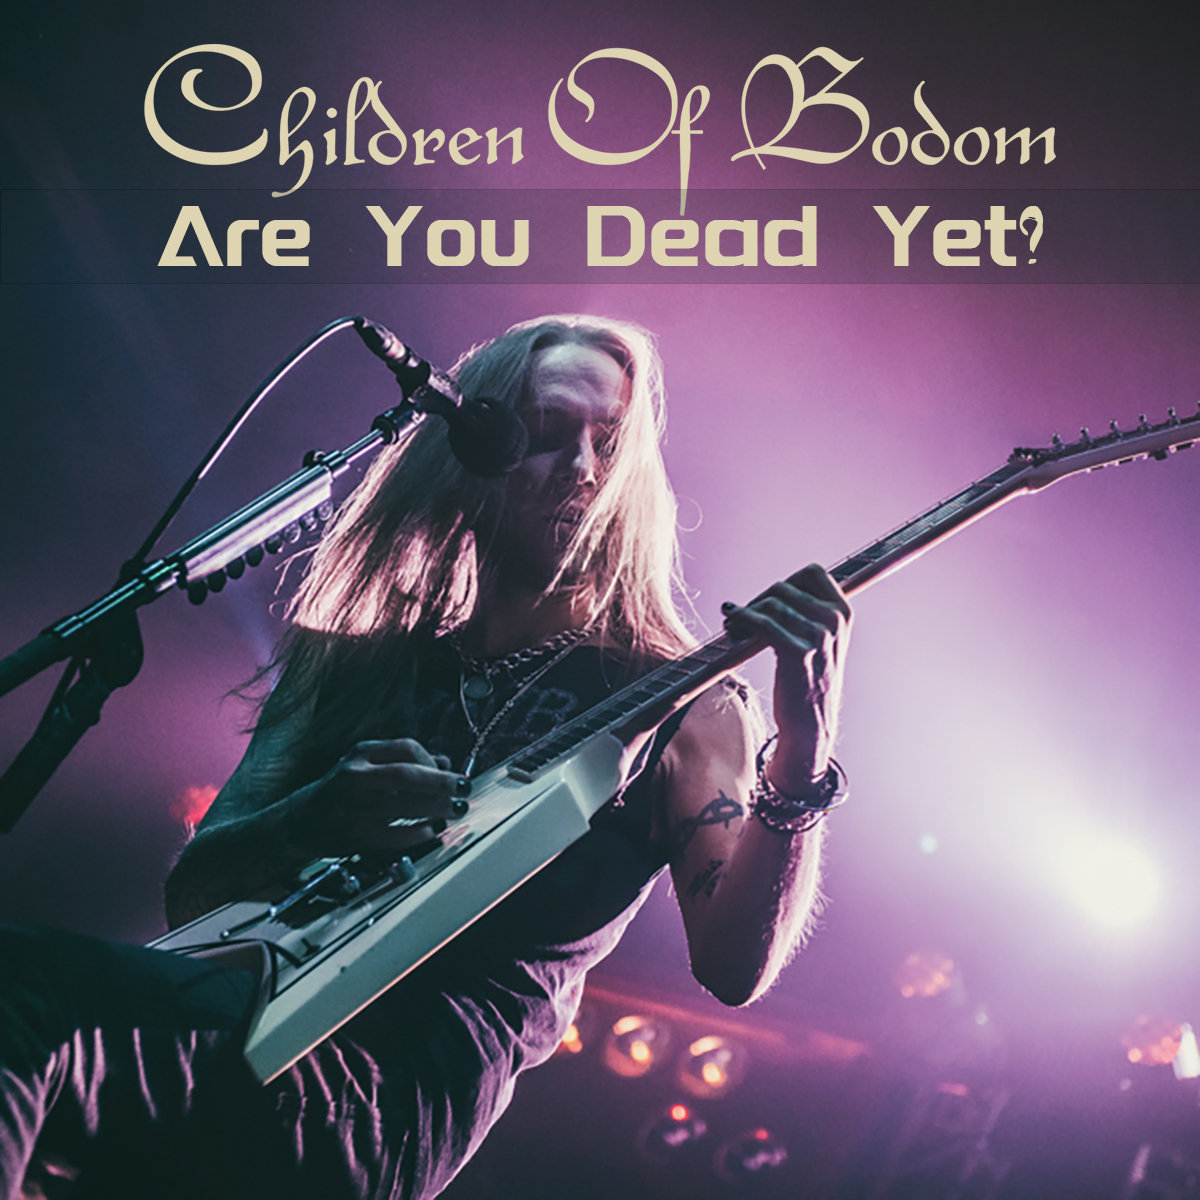 Children Of Bodom - Are You Dead Yet?电吉他教学音视频伴奏谱